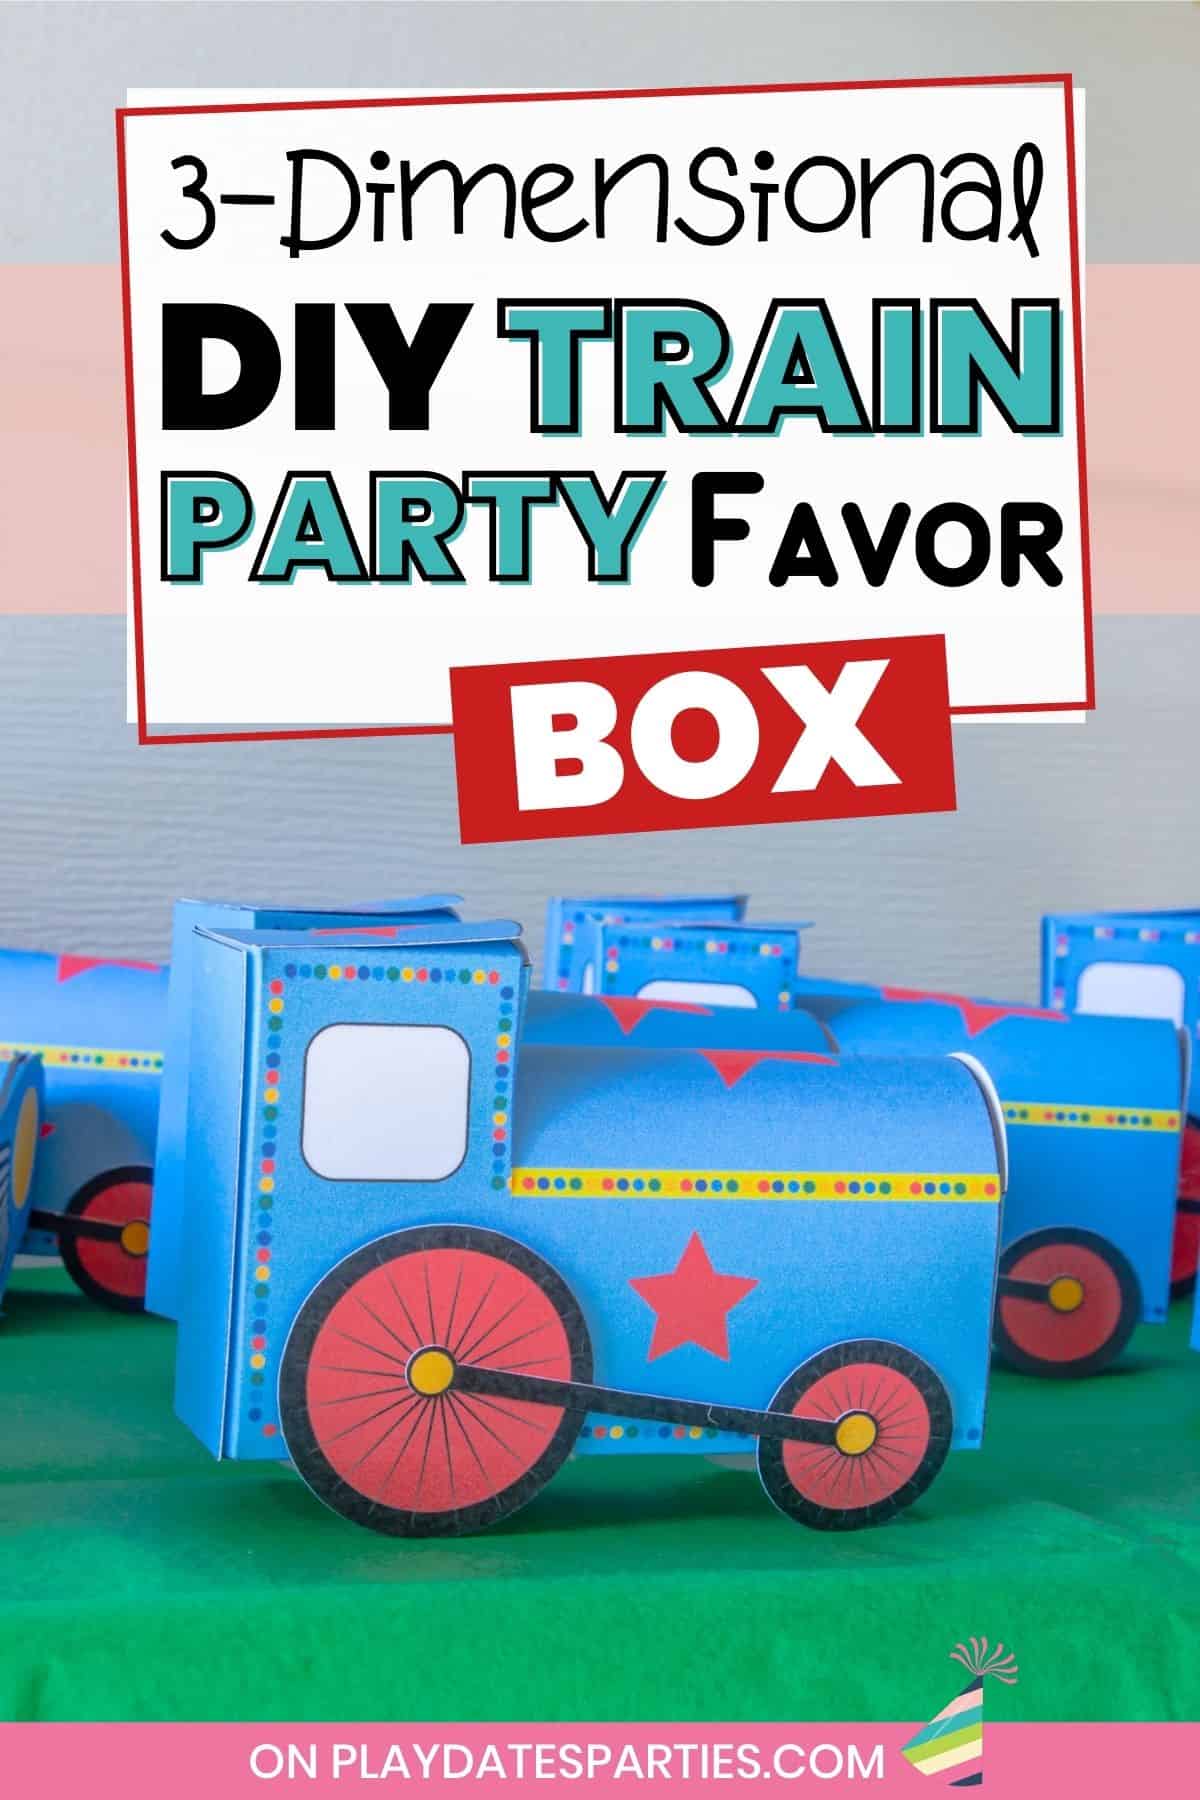 photo of a blue and red train party favor box set out for a party with the text overlay 3 dimensional DIY train party favor box